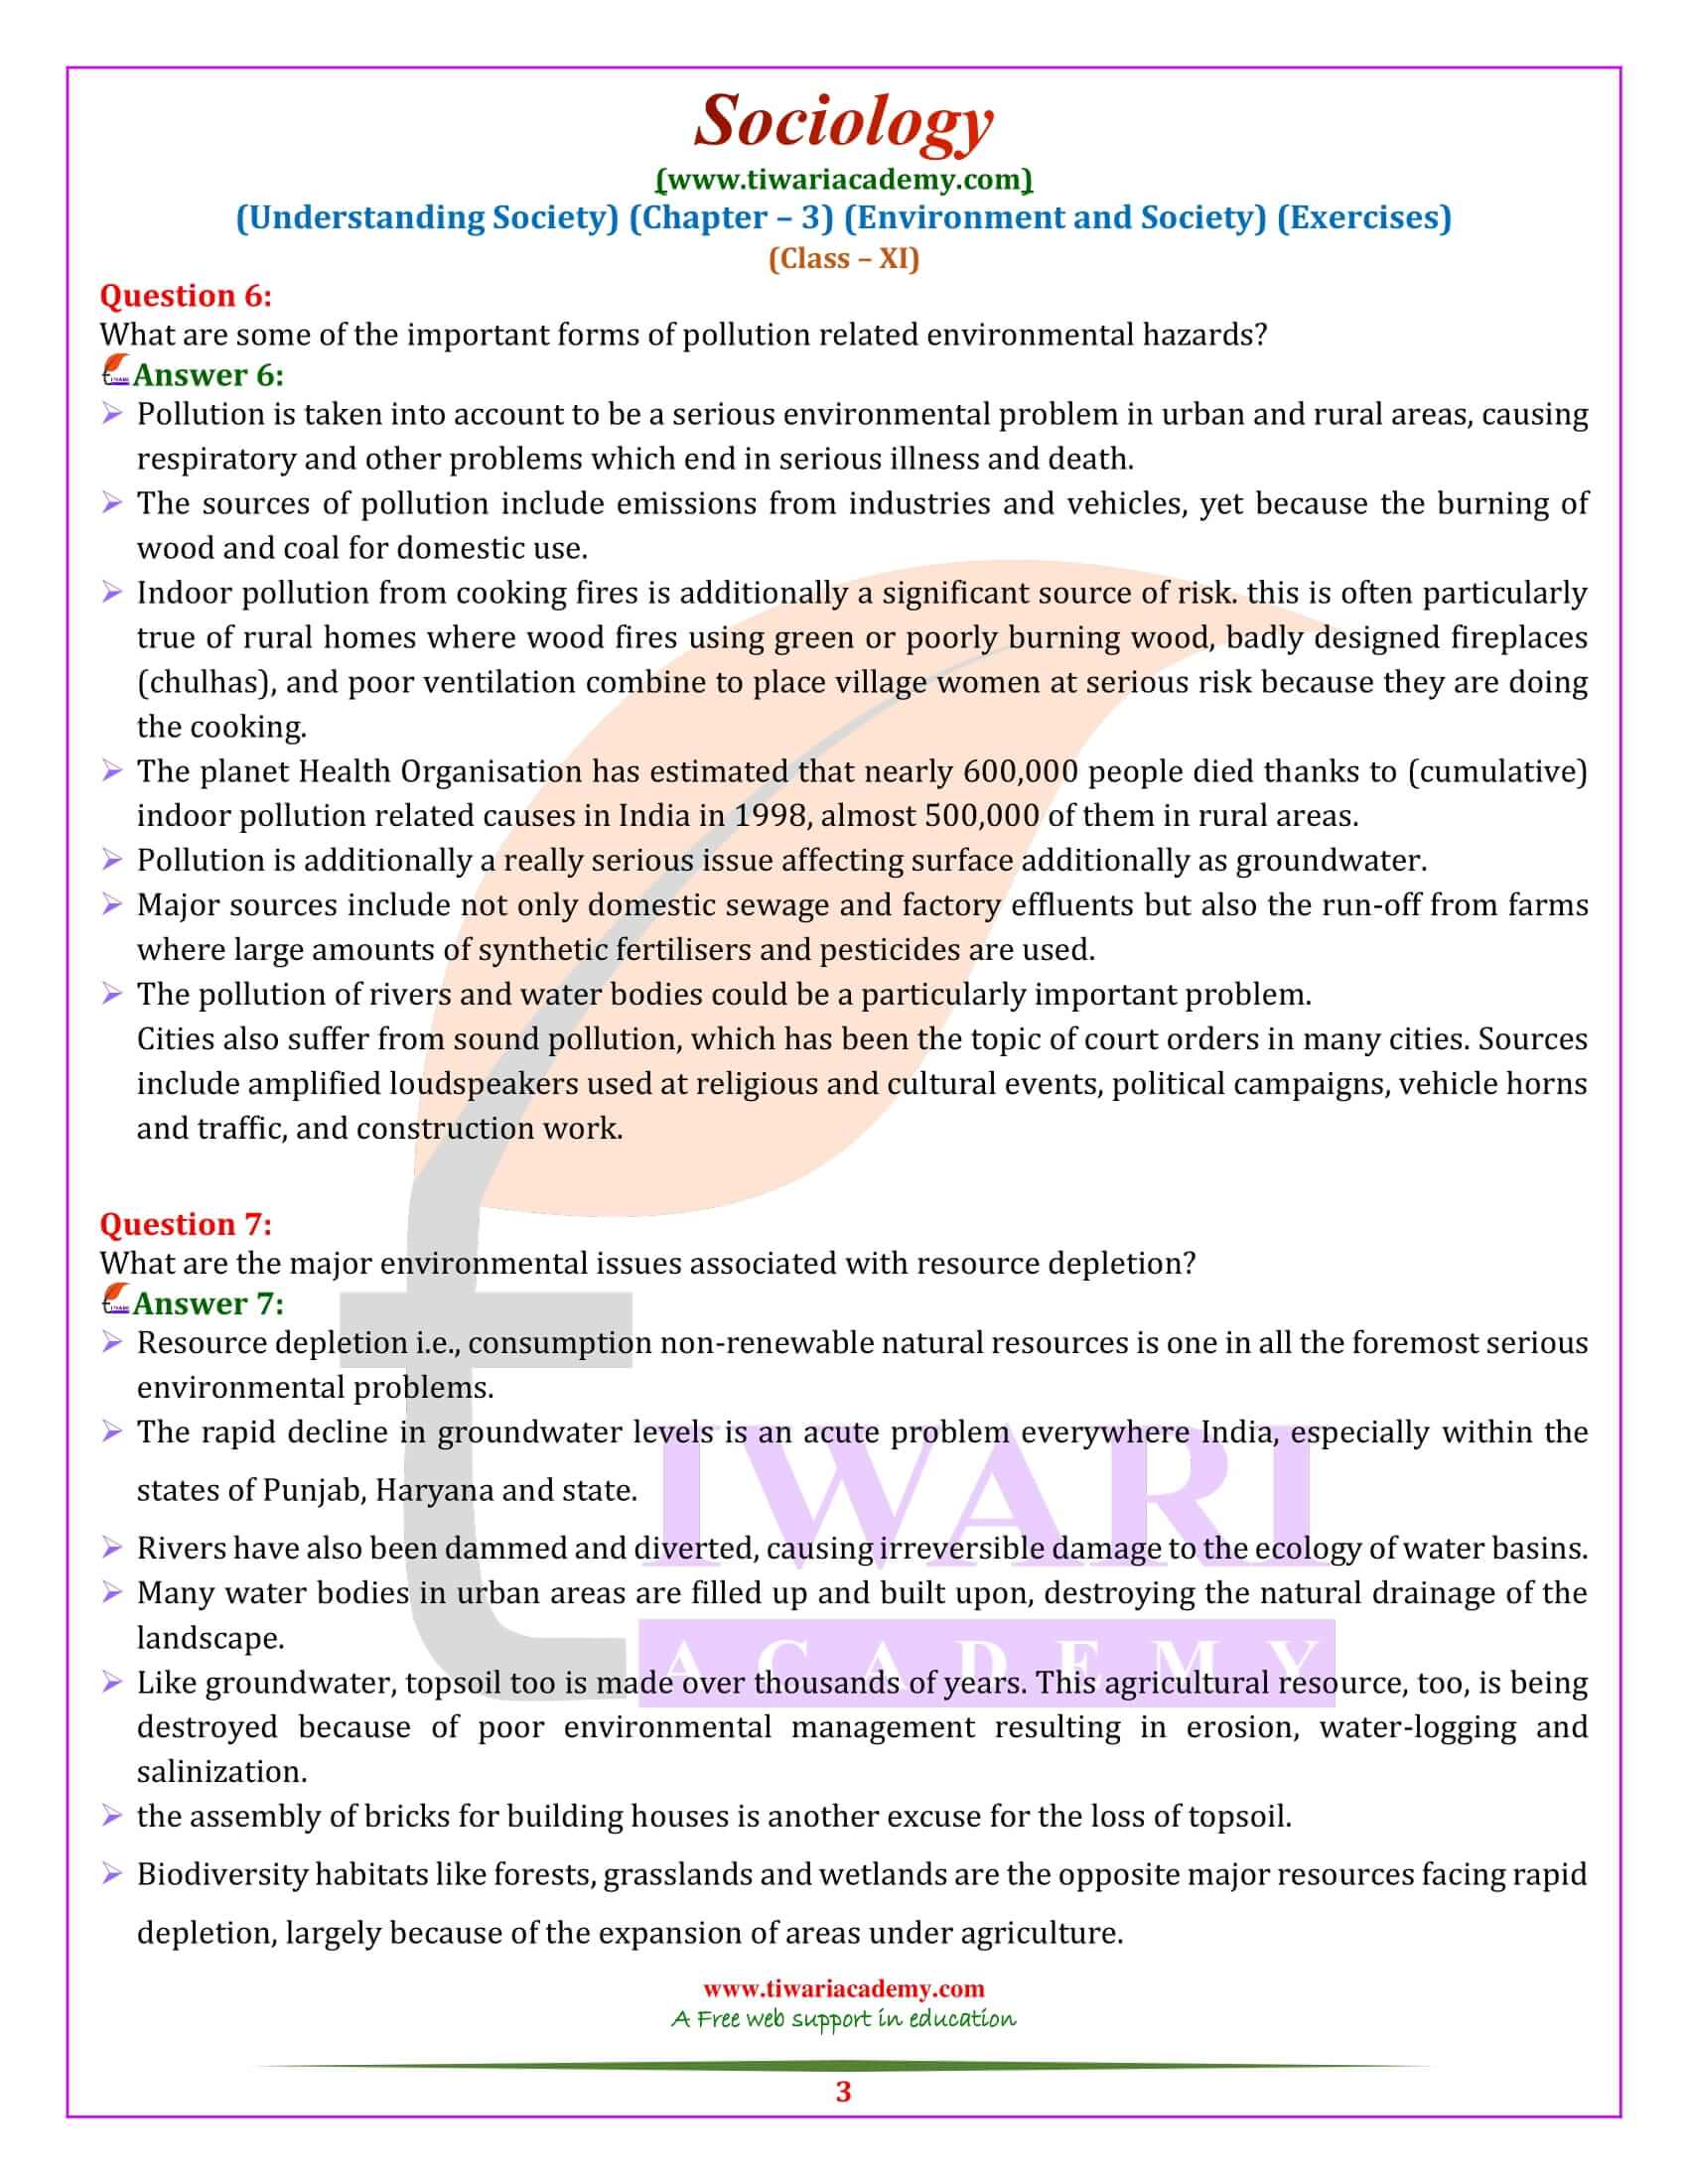 NCERT Solutions for Class 11 Sociology Chapter 3 Question Answers